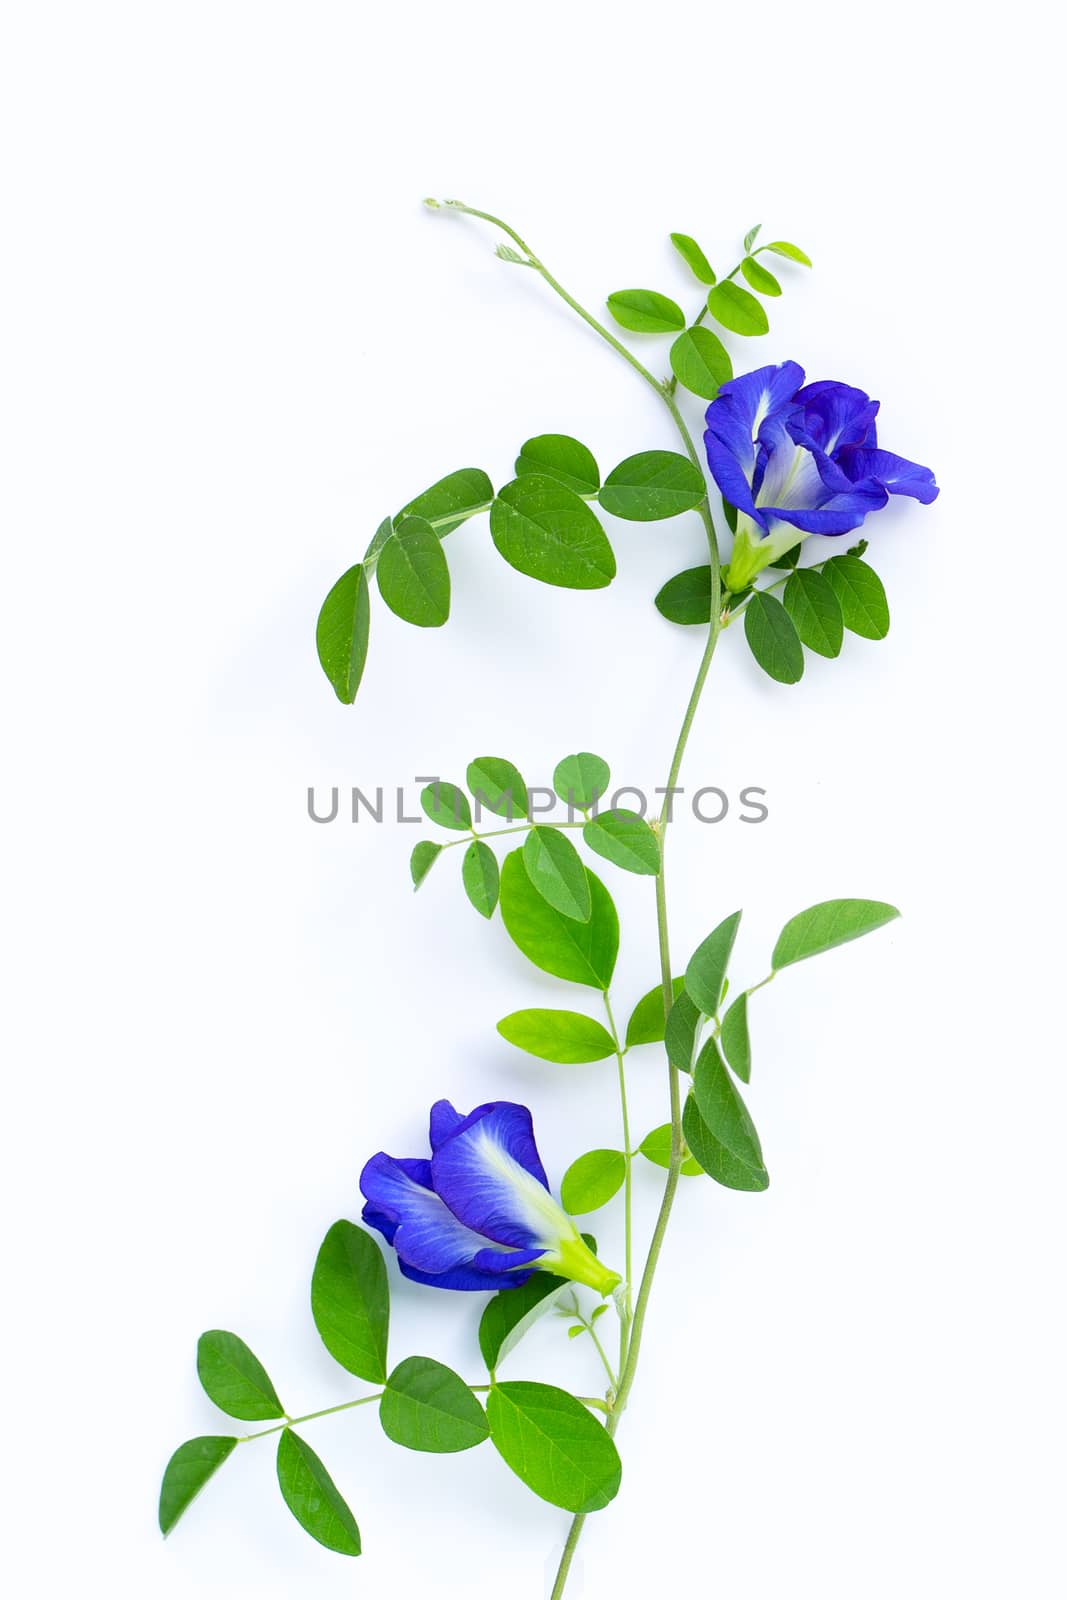 Butterfly pea flower with leaves on white background. by Bowonpat